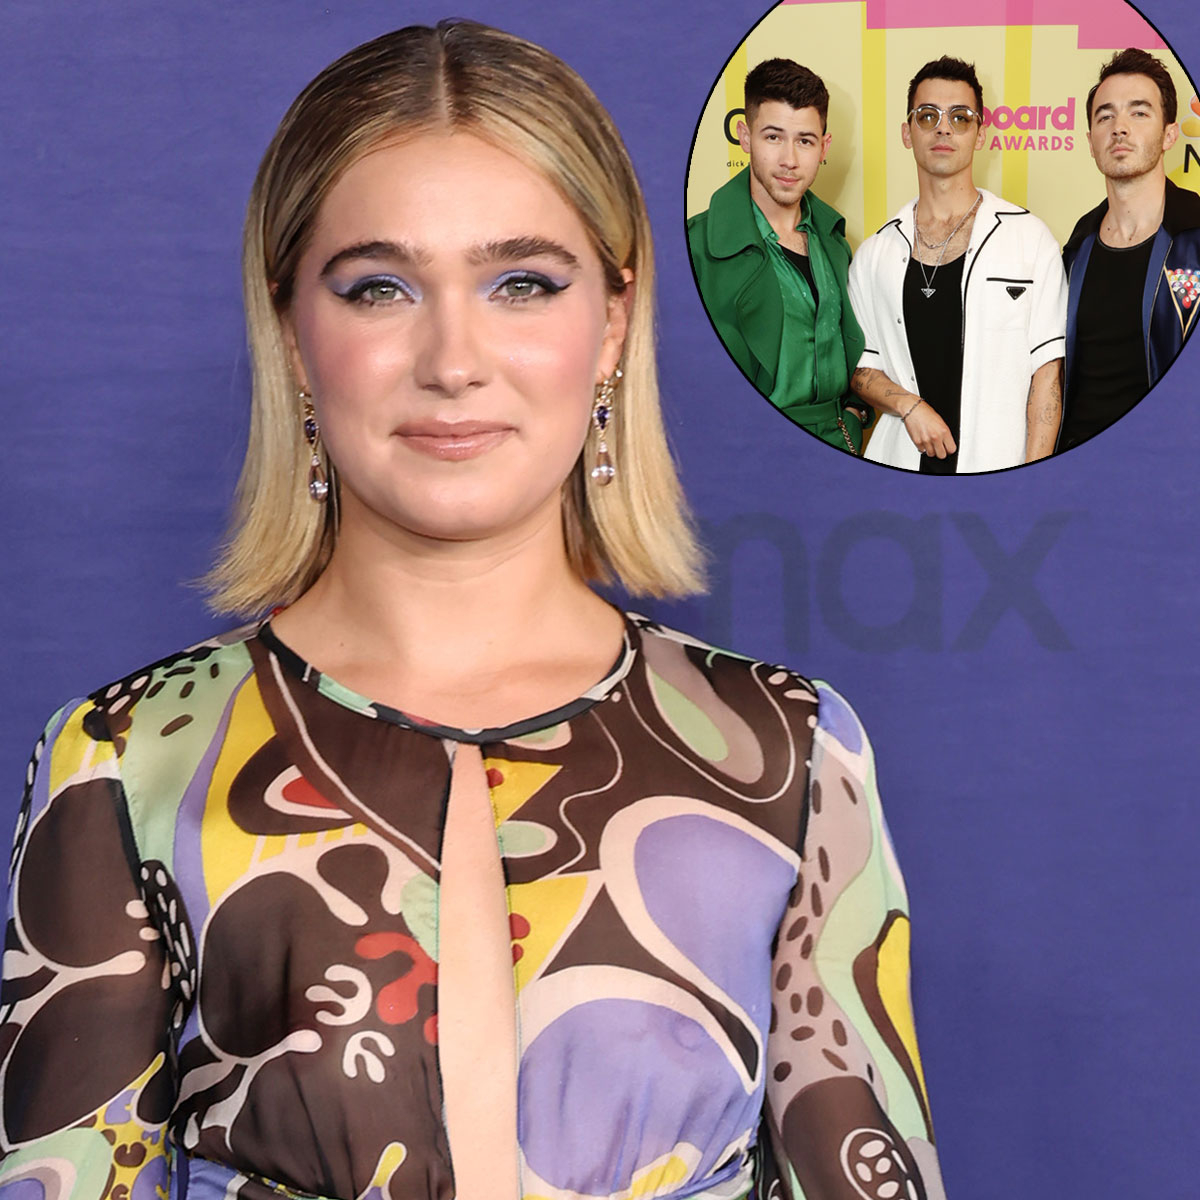 Haley Lu Richardson Jokes About Being “Honorary” Jonas Brothers Wife After Starring in Music Video – E! Online